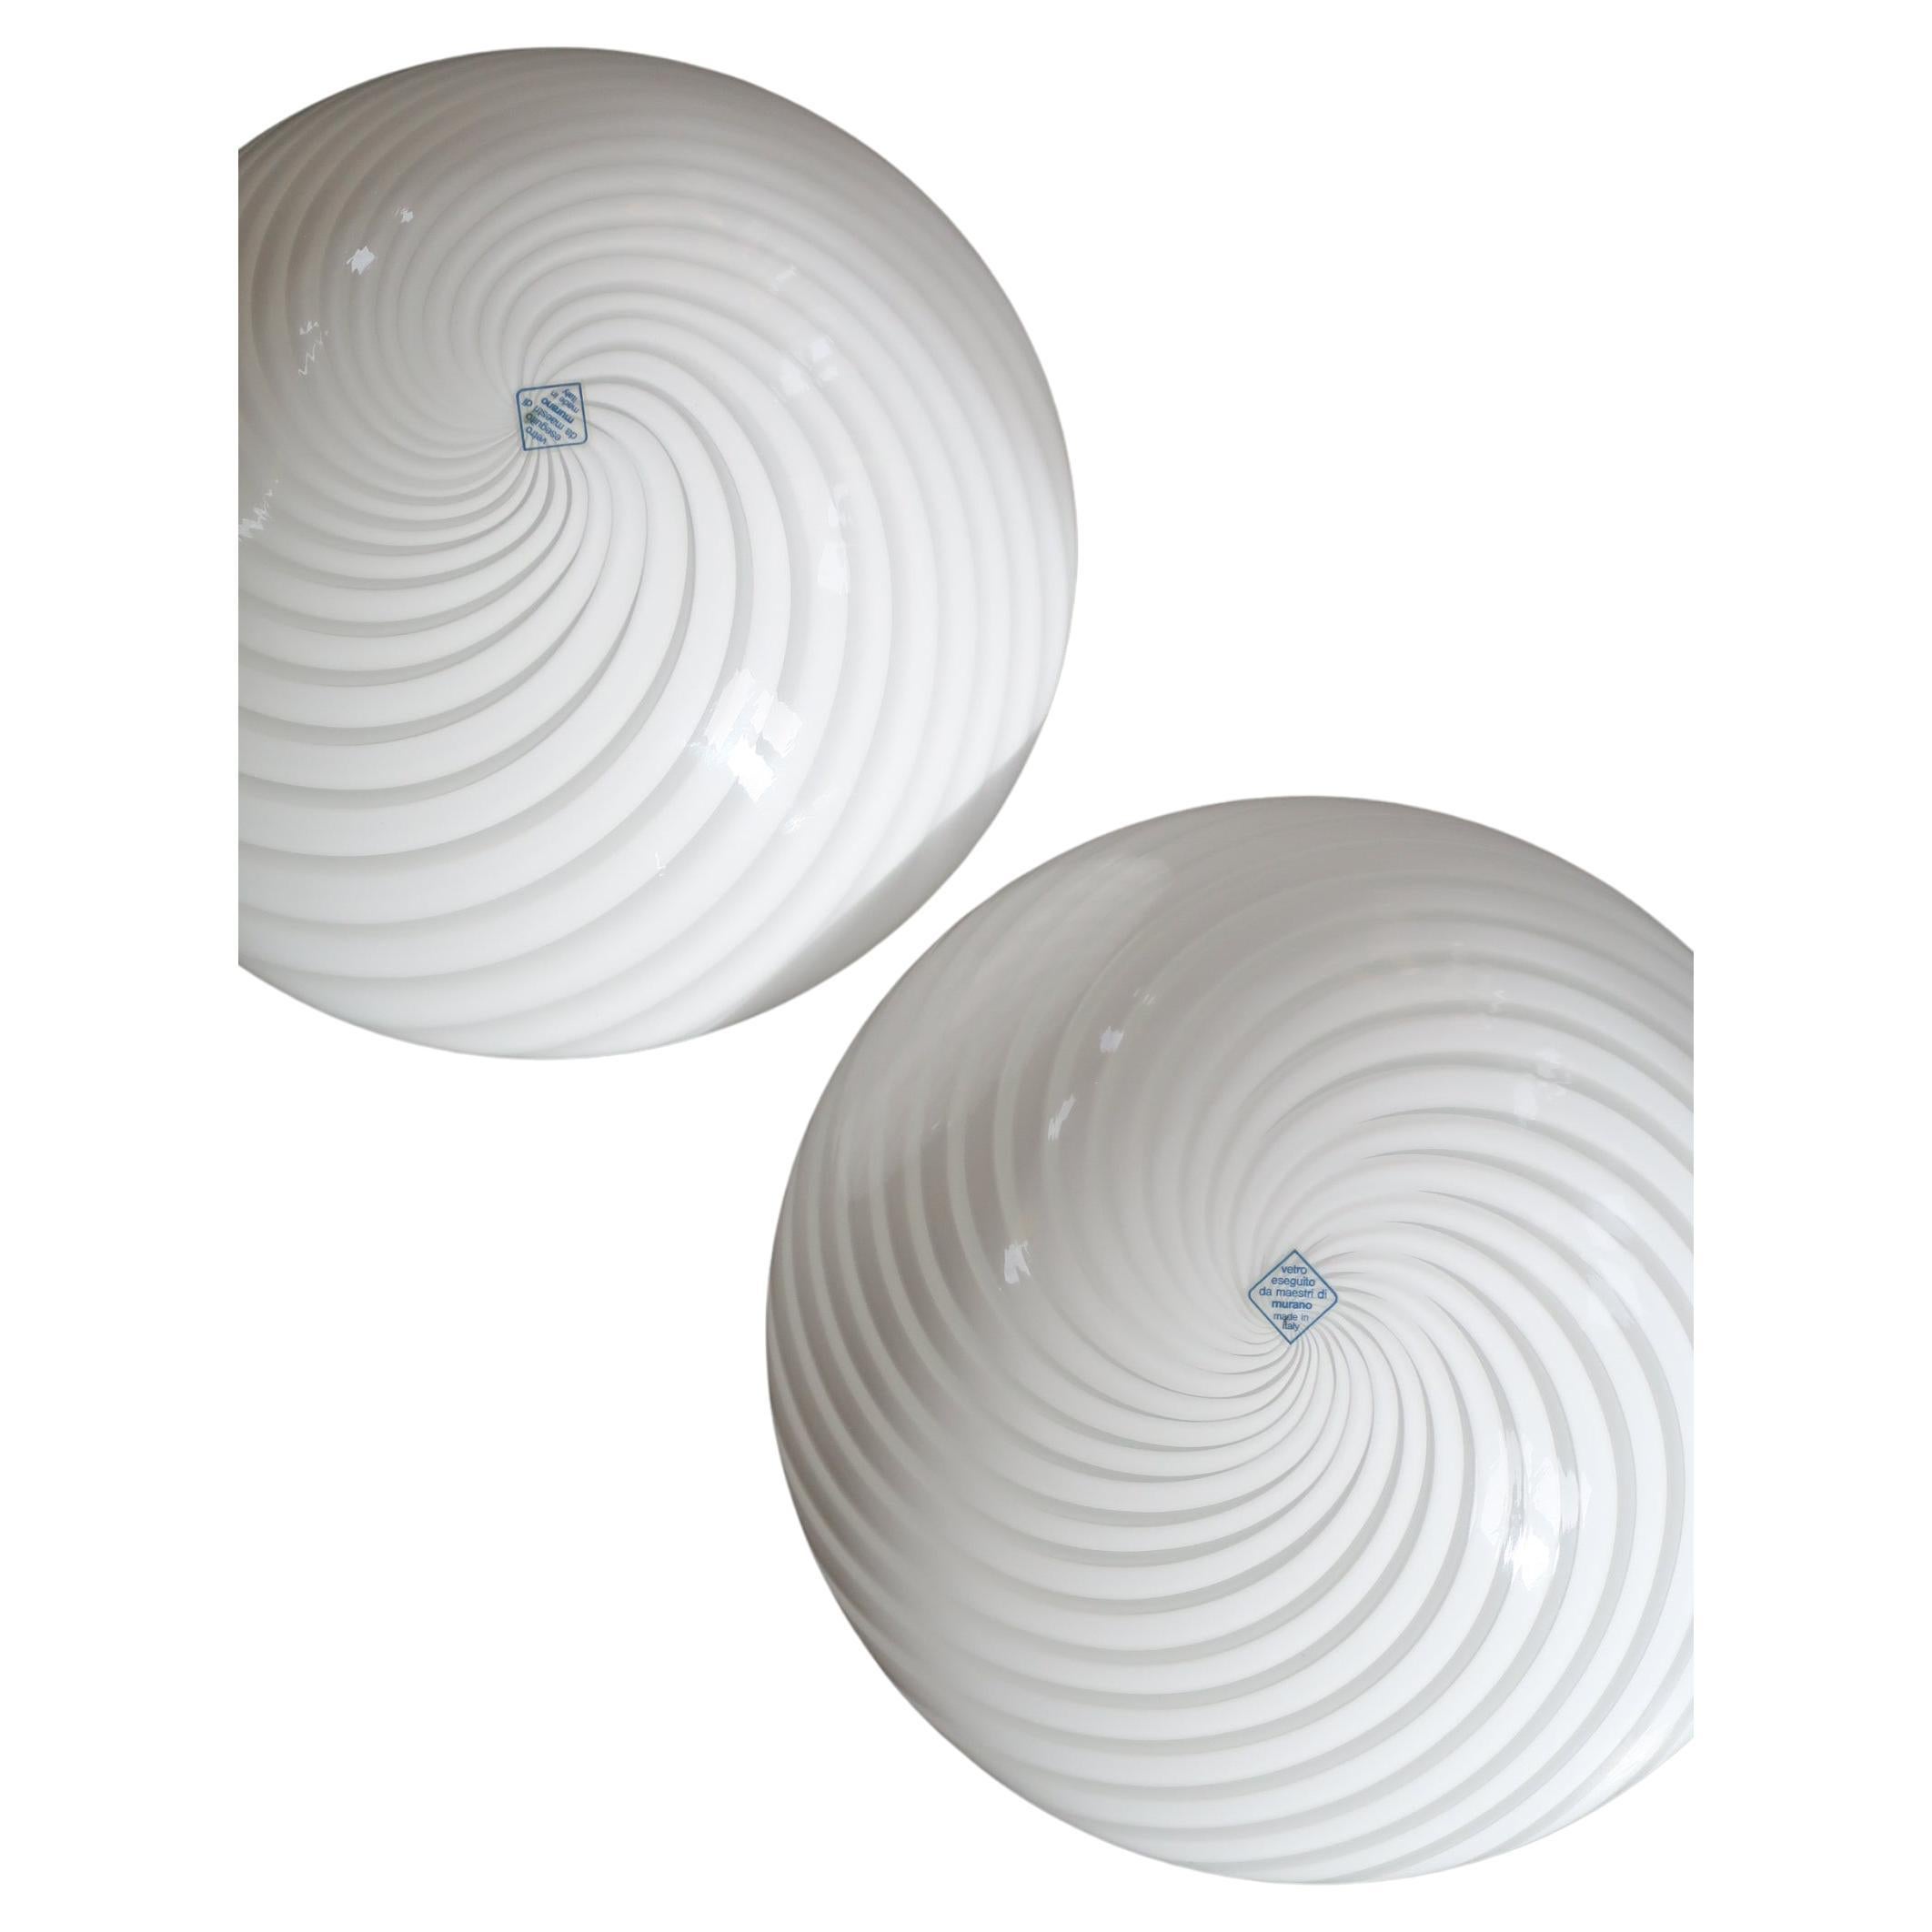 Pair of vintage Murano 1970s Flush Mount Wall Ceiling Lamps in White Swirl Glass